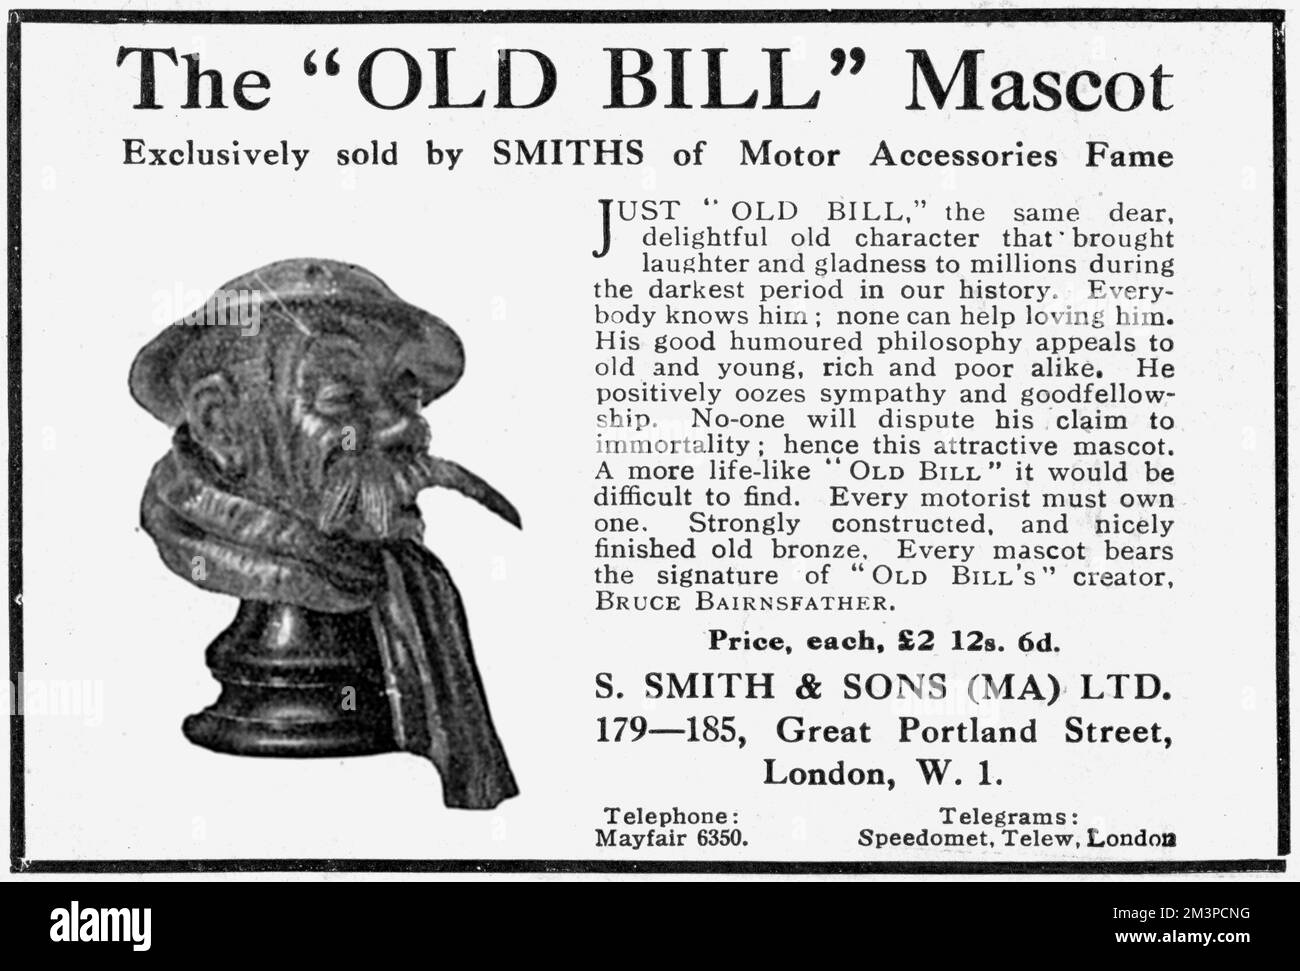 Advertisement for the &quot;Old Bill&quot; car mascot, exclusively sold by Smith of Motor Accessories fame.  Old Bill was the soldier character created by the cartoonist Captain Bruce Bairnsfather in The Bystander magazine during the First World War.  Old Bill's popularity was widespread and his image - and other wartime cartoons by Bairnsfather - was licensed for a wide range of merchandise.     Date: 1920 Stock Photo